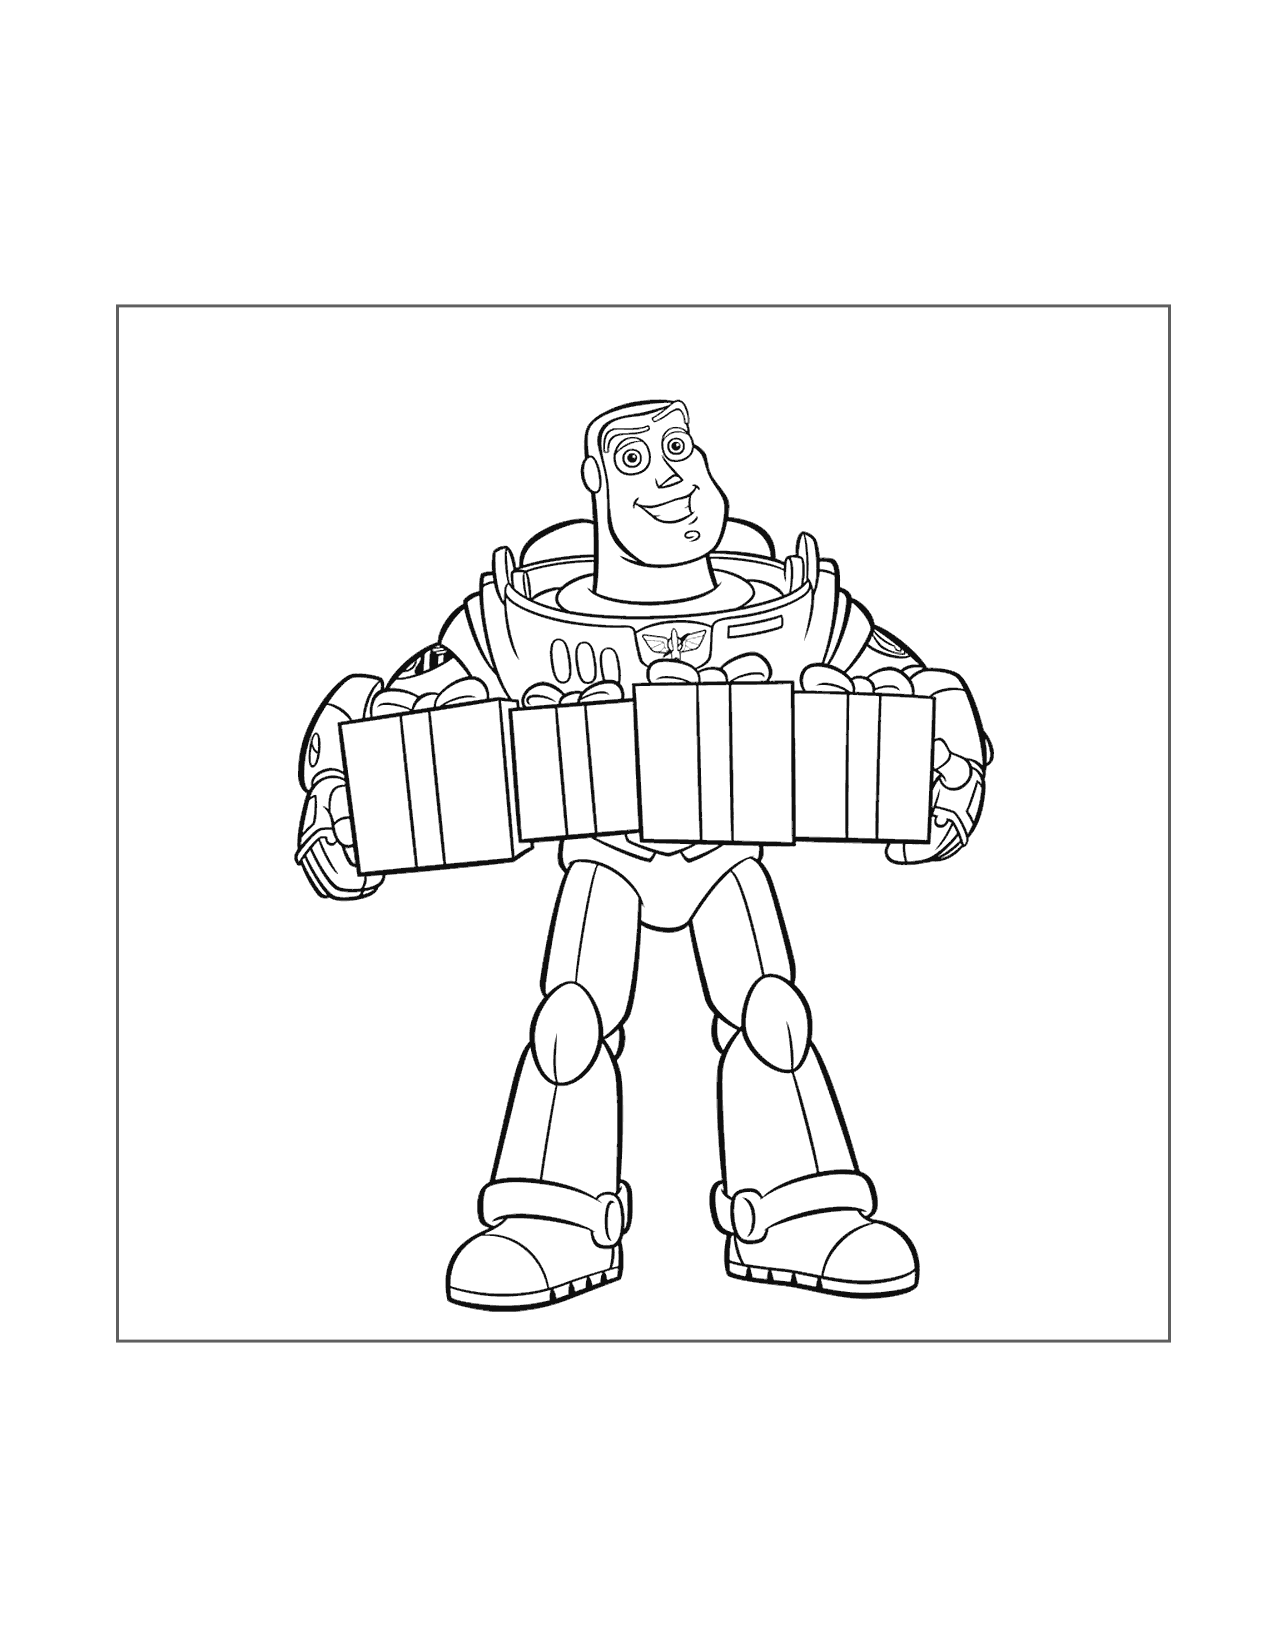 Buzz Lightyear With Christmas Presents Coloring Page